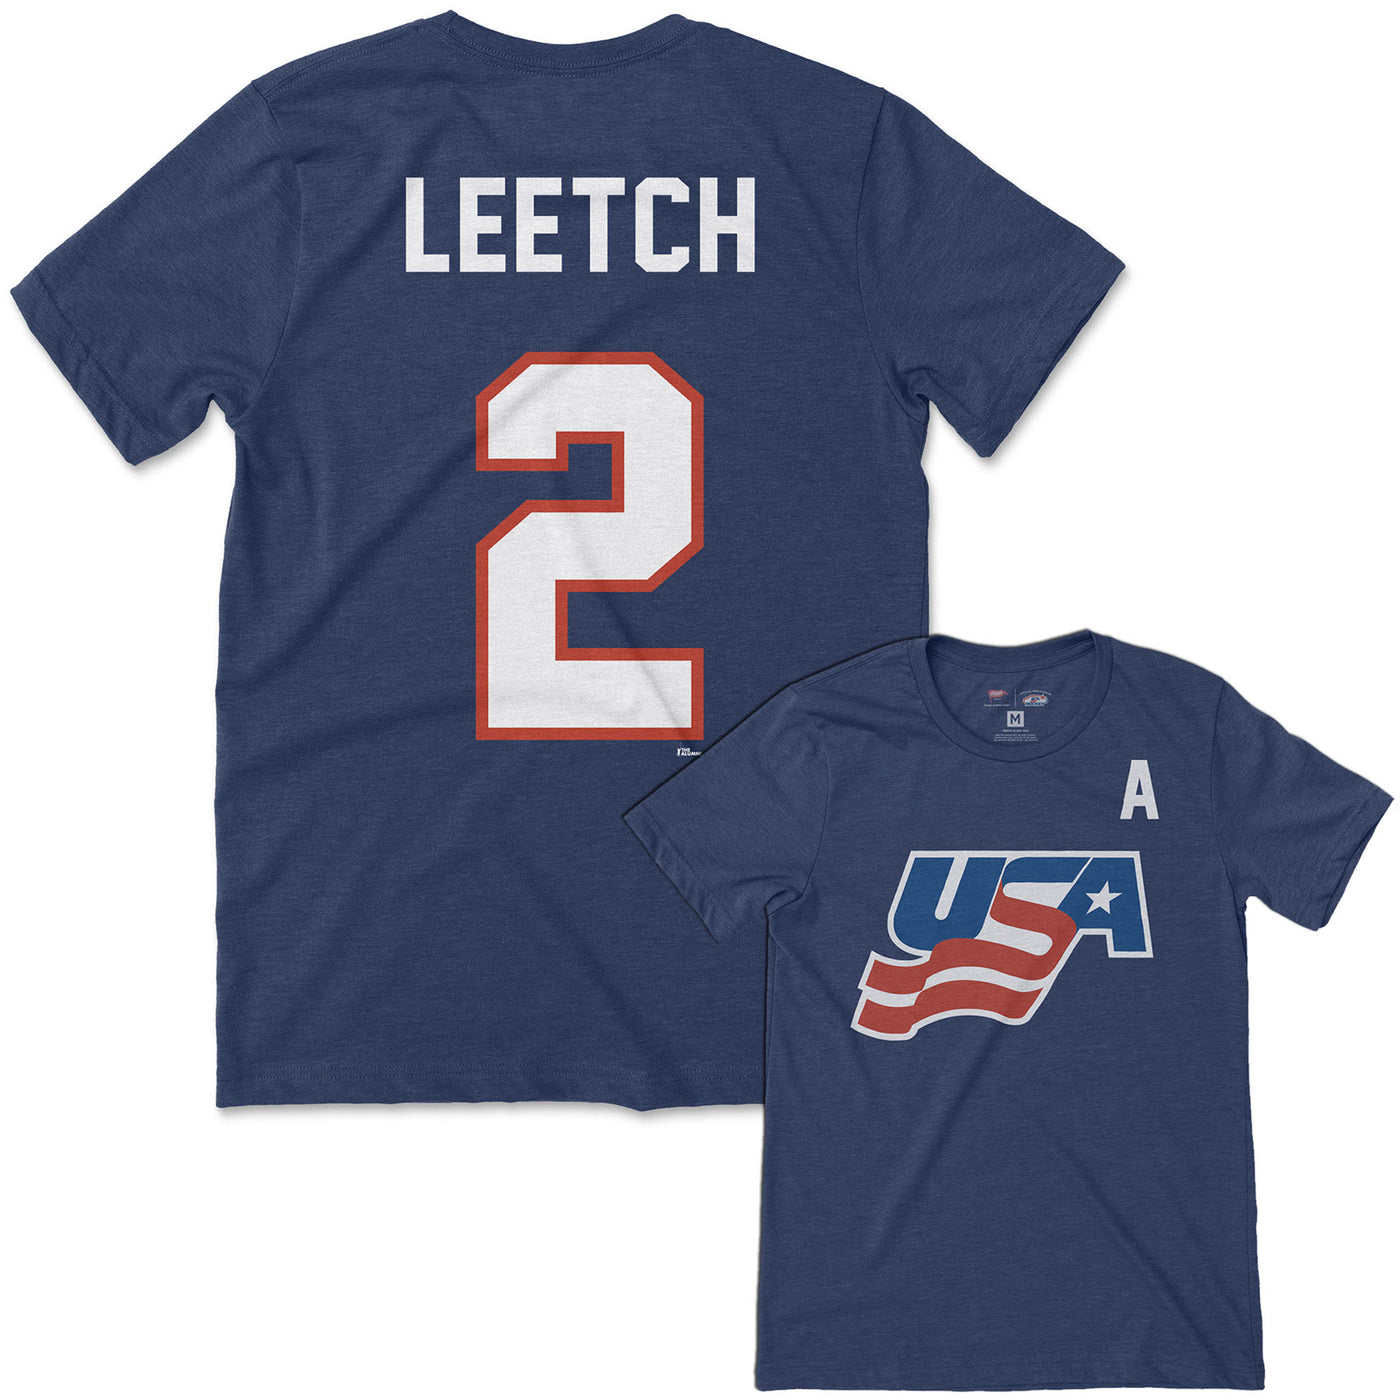 Brian Leetch's iconic jersey